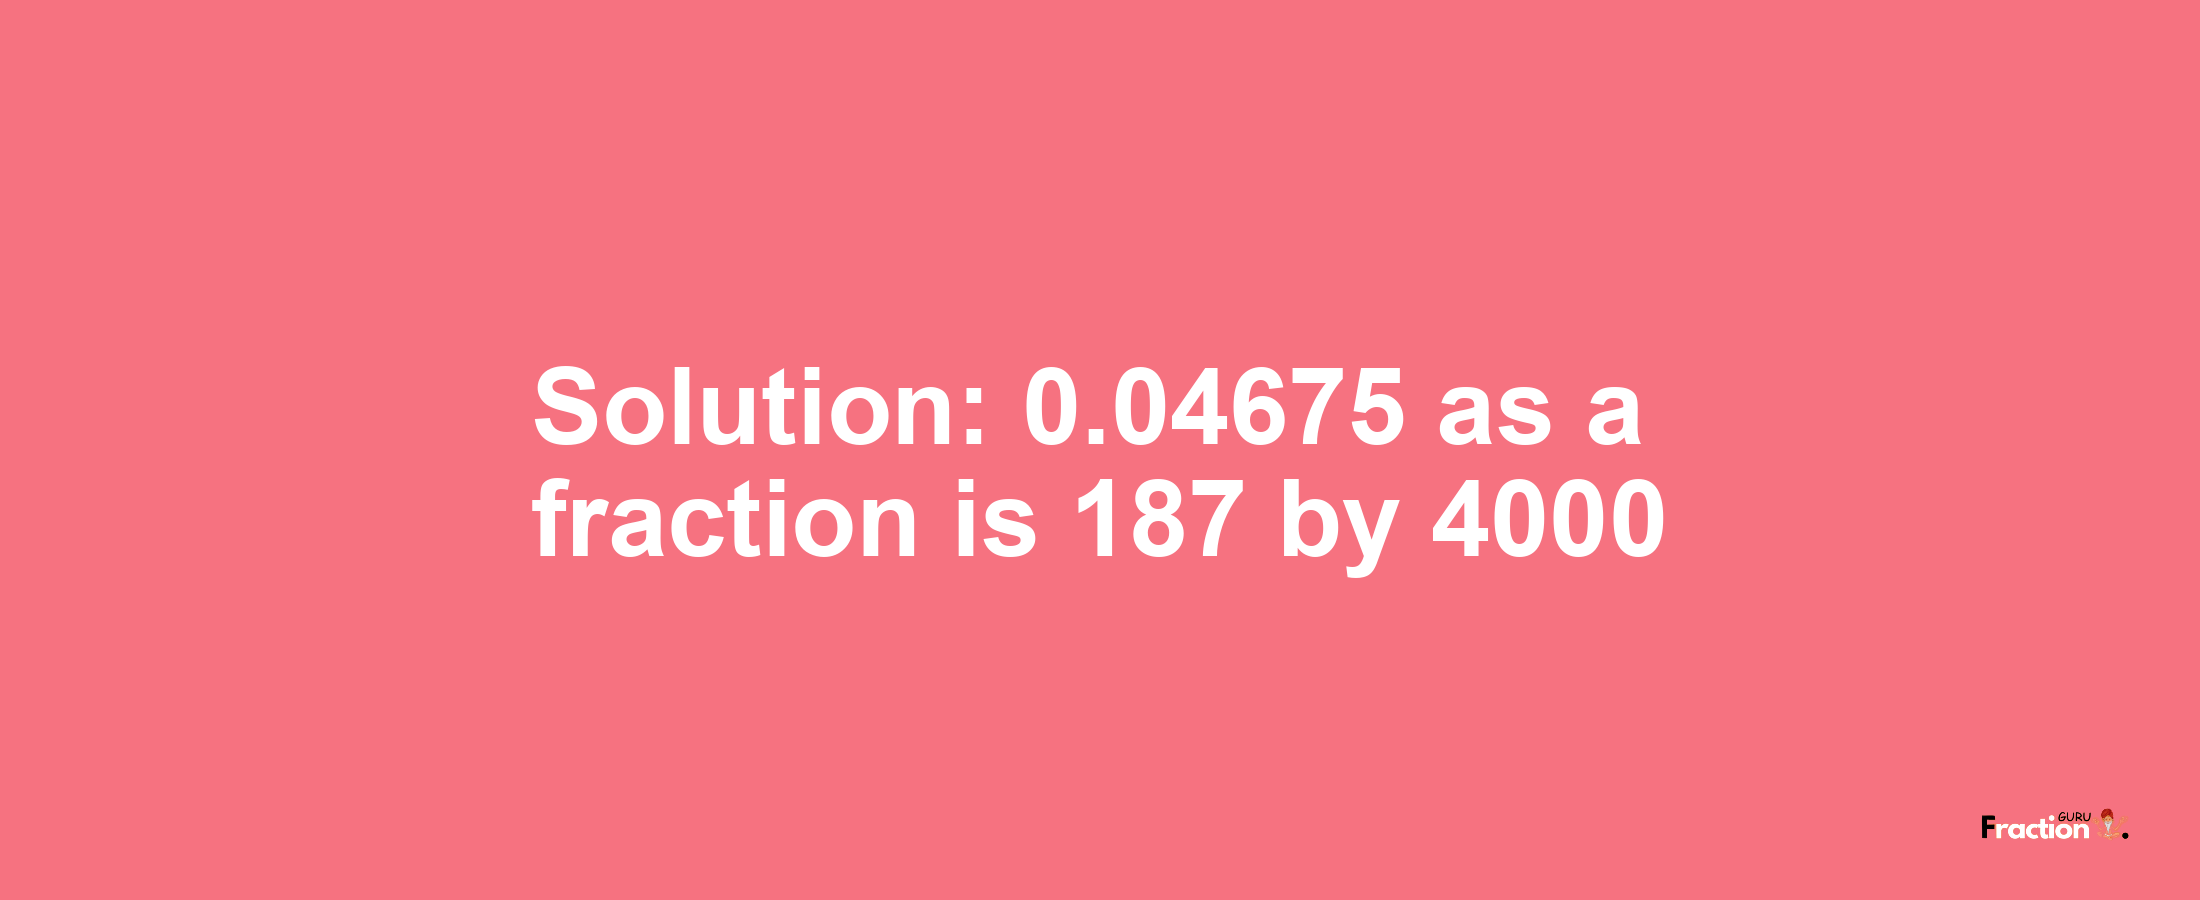 Solution:0.04675 as a fraction is 187/4000